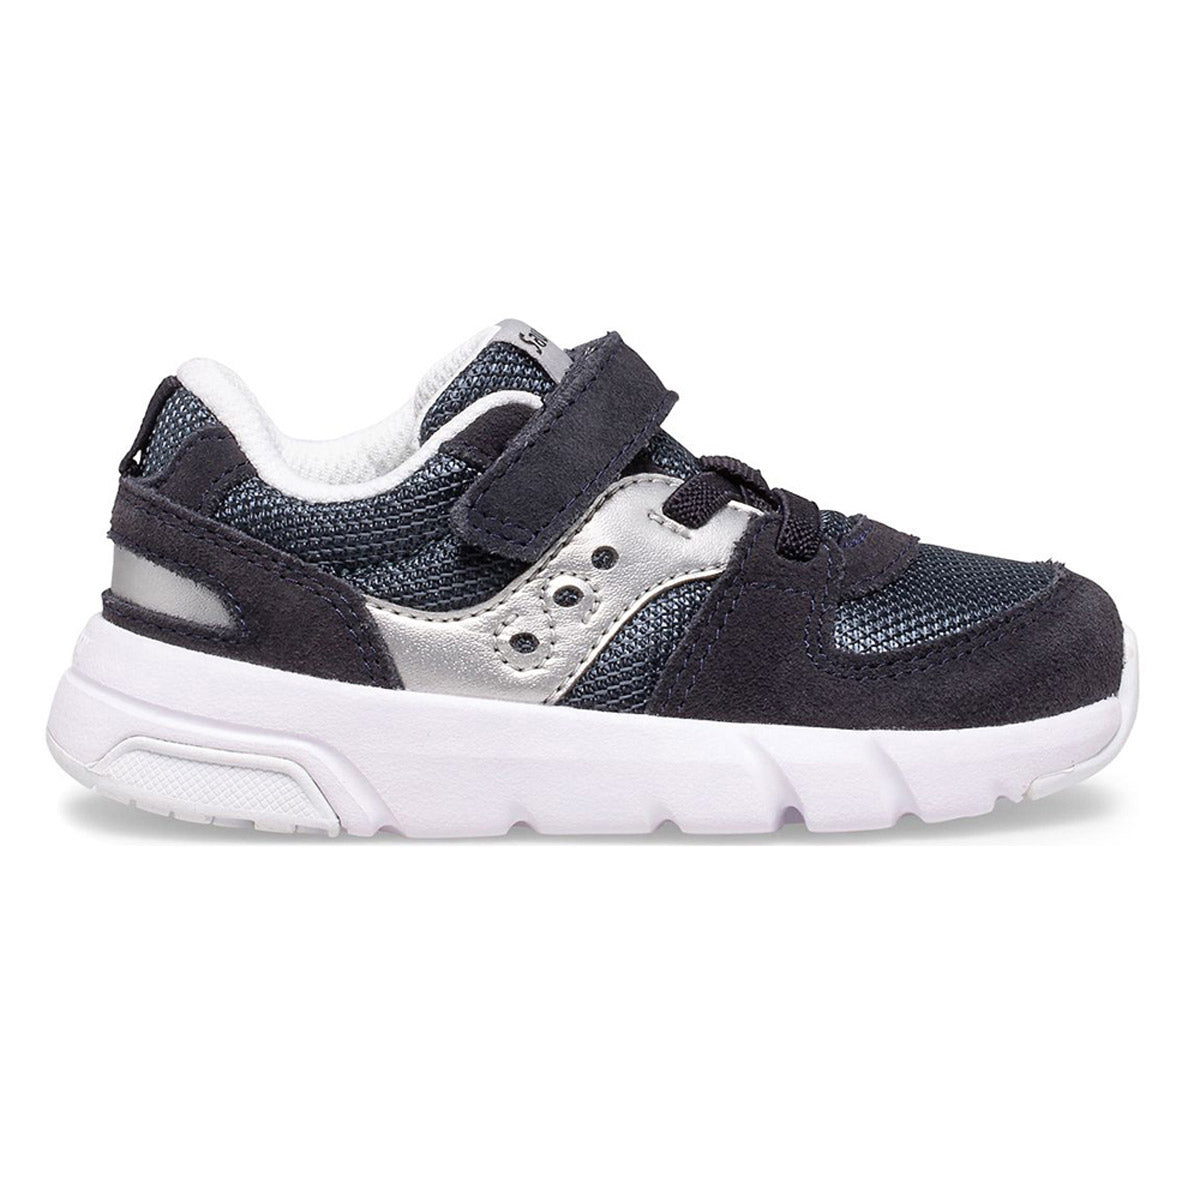 A single Saucony navy blue toddler's sneaker with velcro straps, reinforced toes, and a white sole.